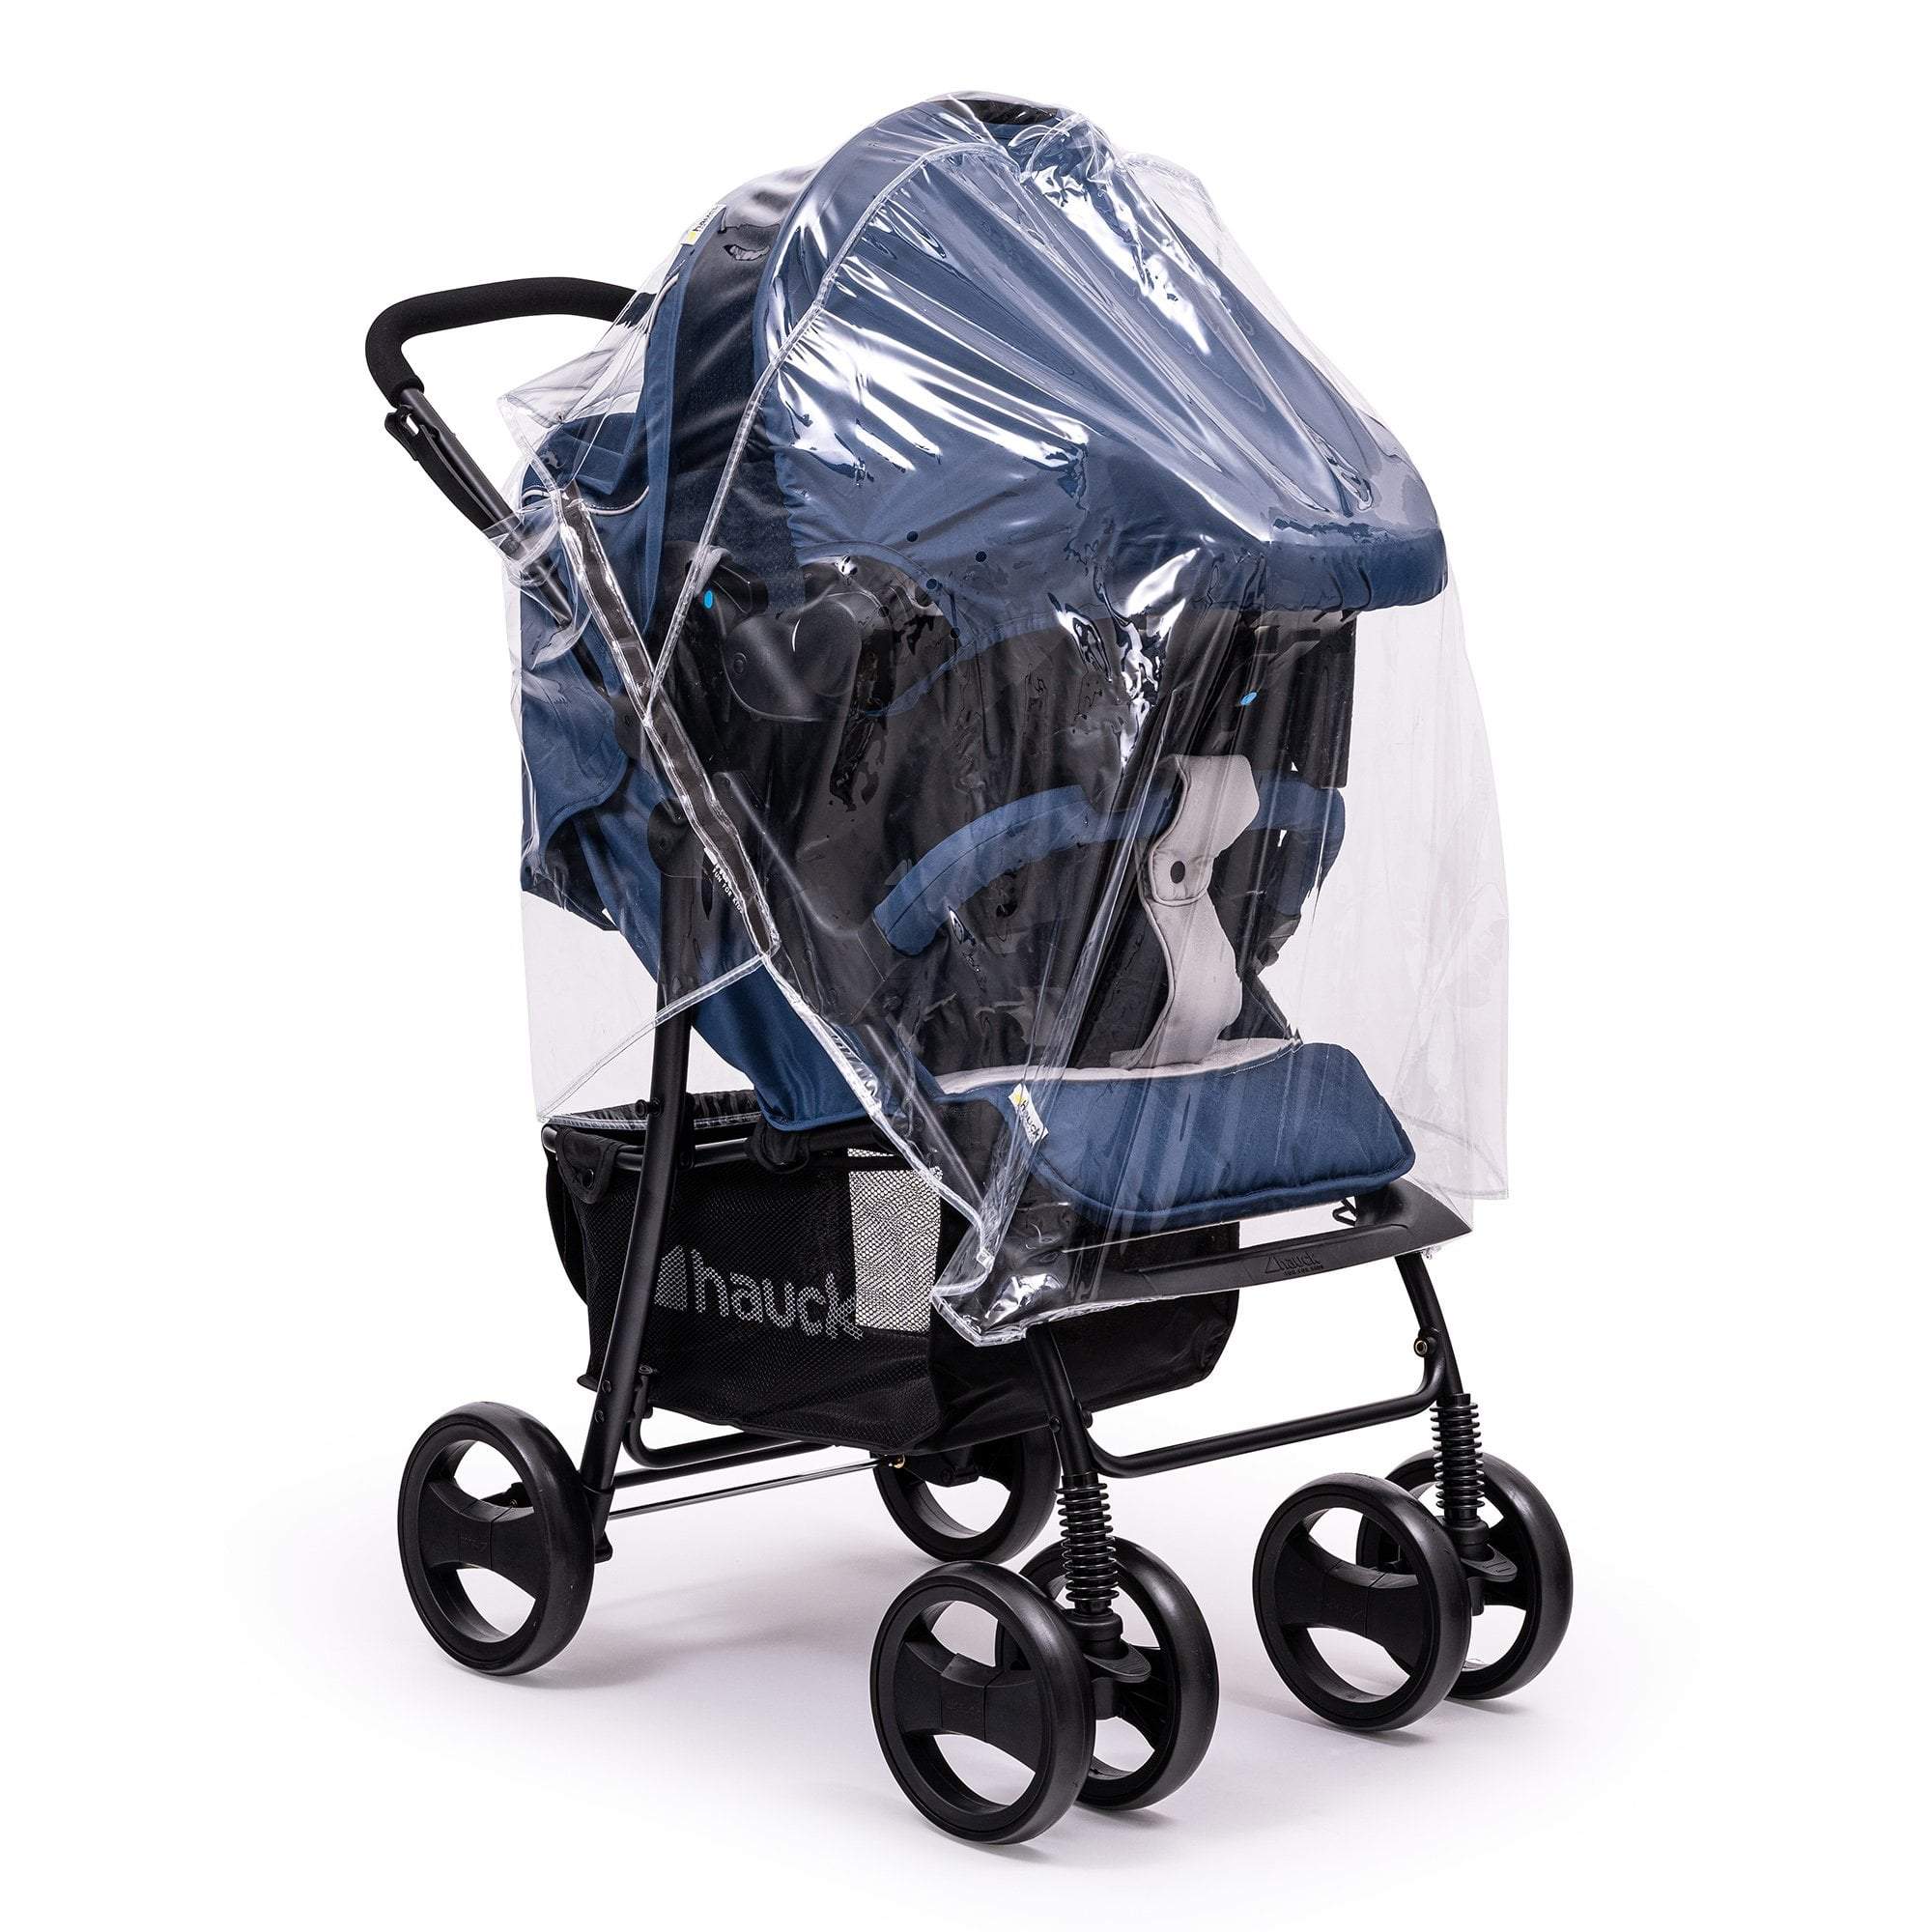 Travel System Raincover Compatible with Inglesina - Fits All Models - For Your Little One